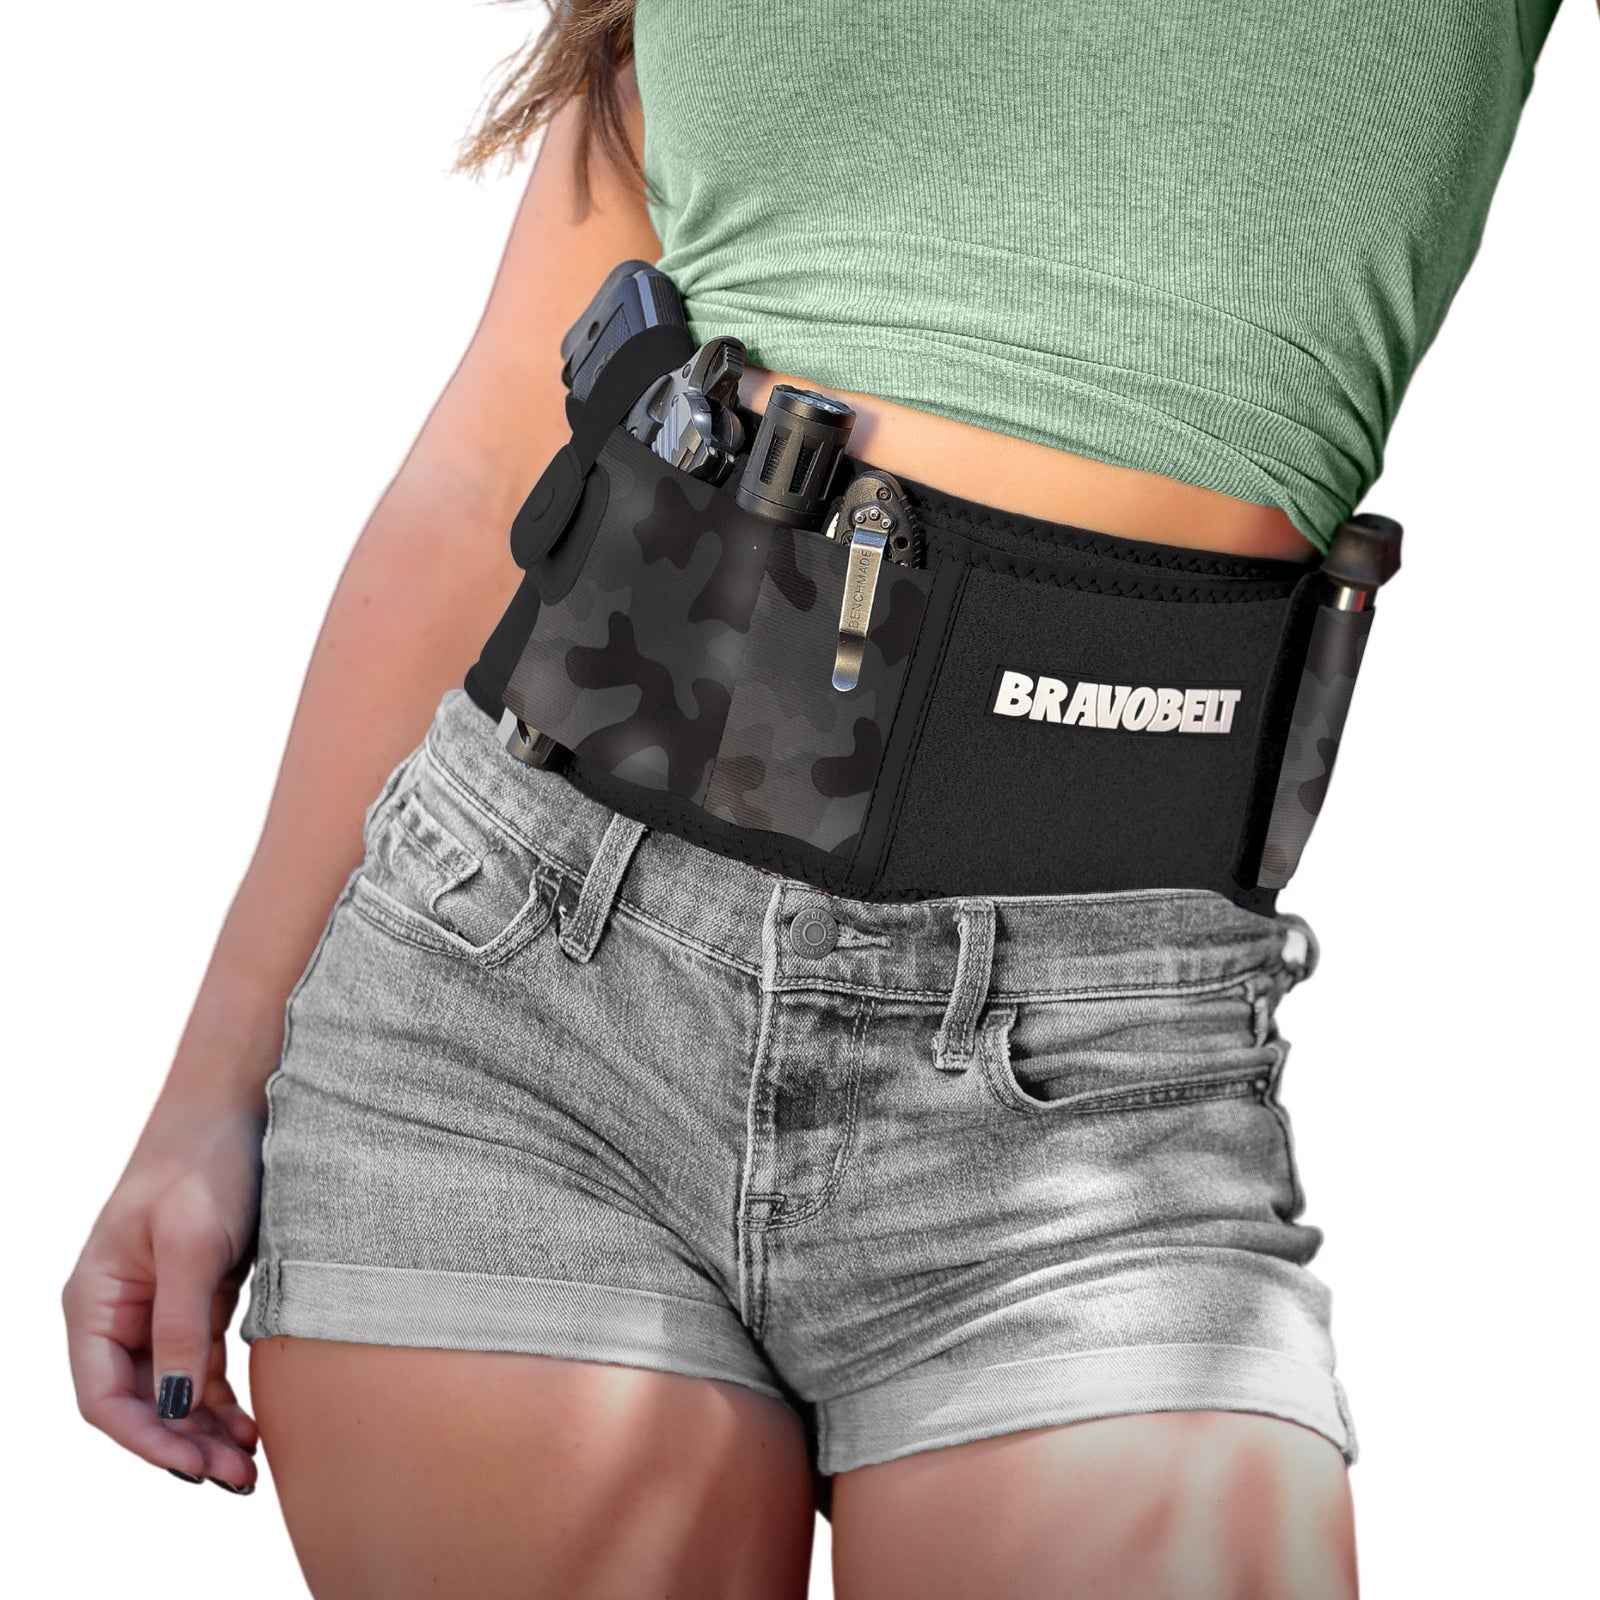 BravoBelt Belly Band Holster for Concealed Carry - Unisex - Tactical Nude